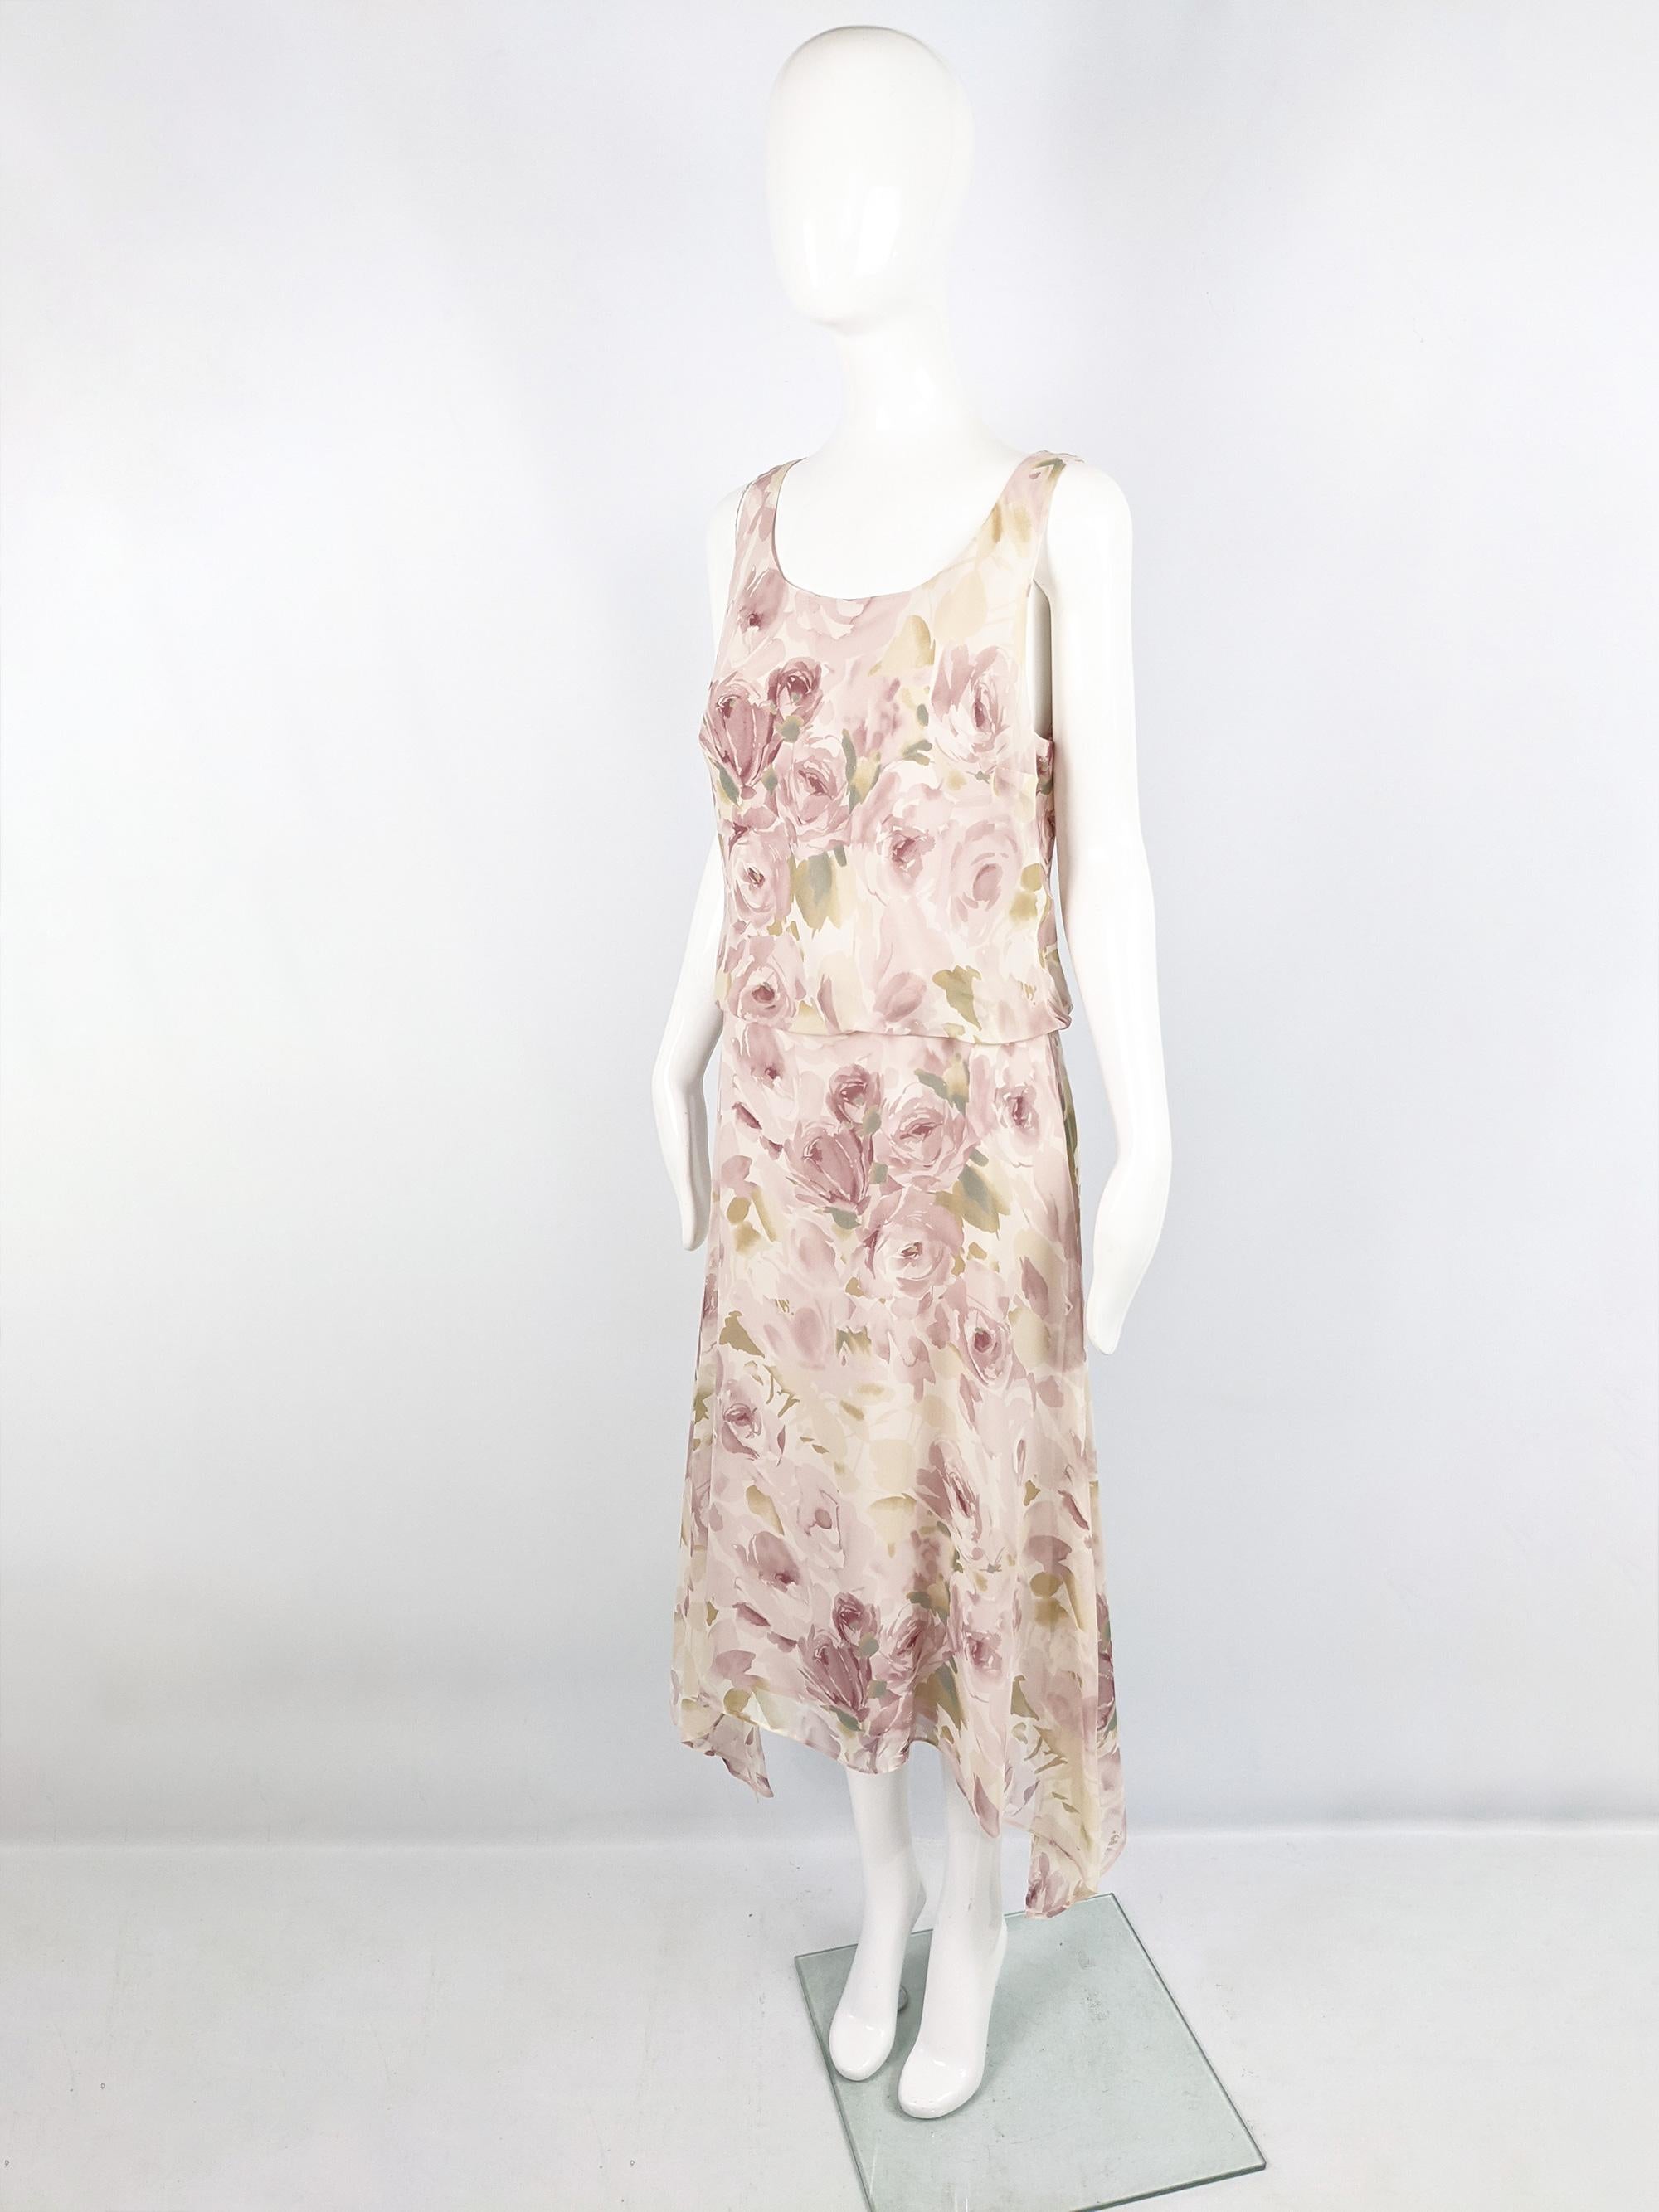 Max Mara Vintage 90s Sheer Pastel Pink Silk Chiffon Sleeveless Dress, 1990s In Excellent Condition For Sale In Doncaster, South Yorkshire